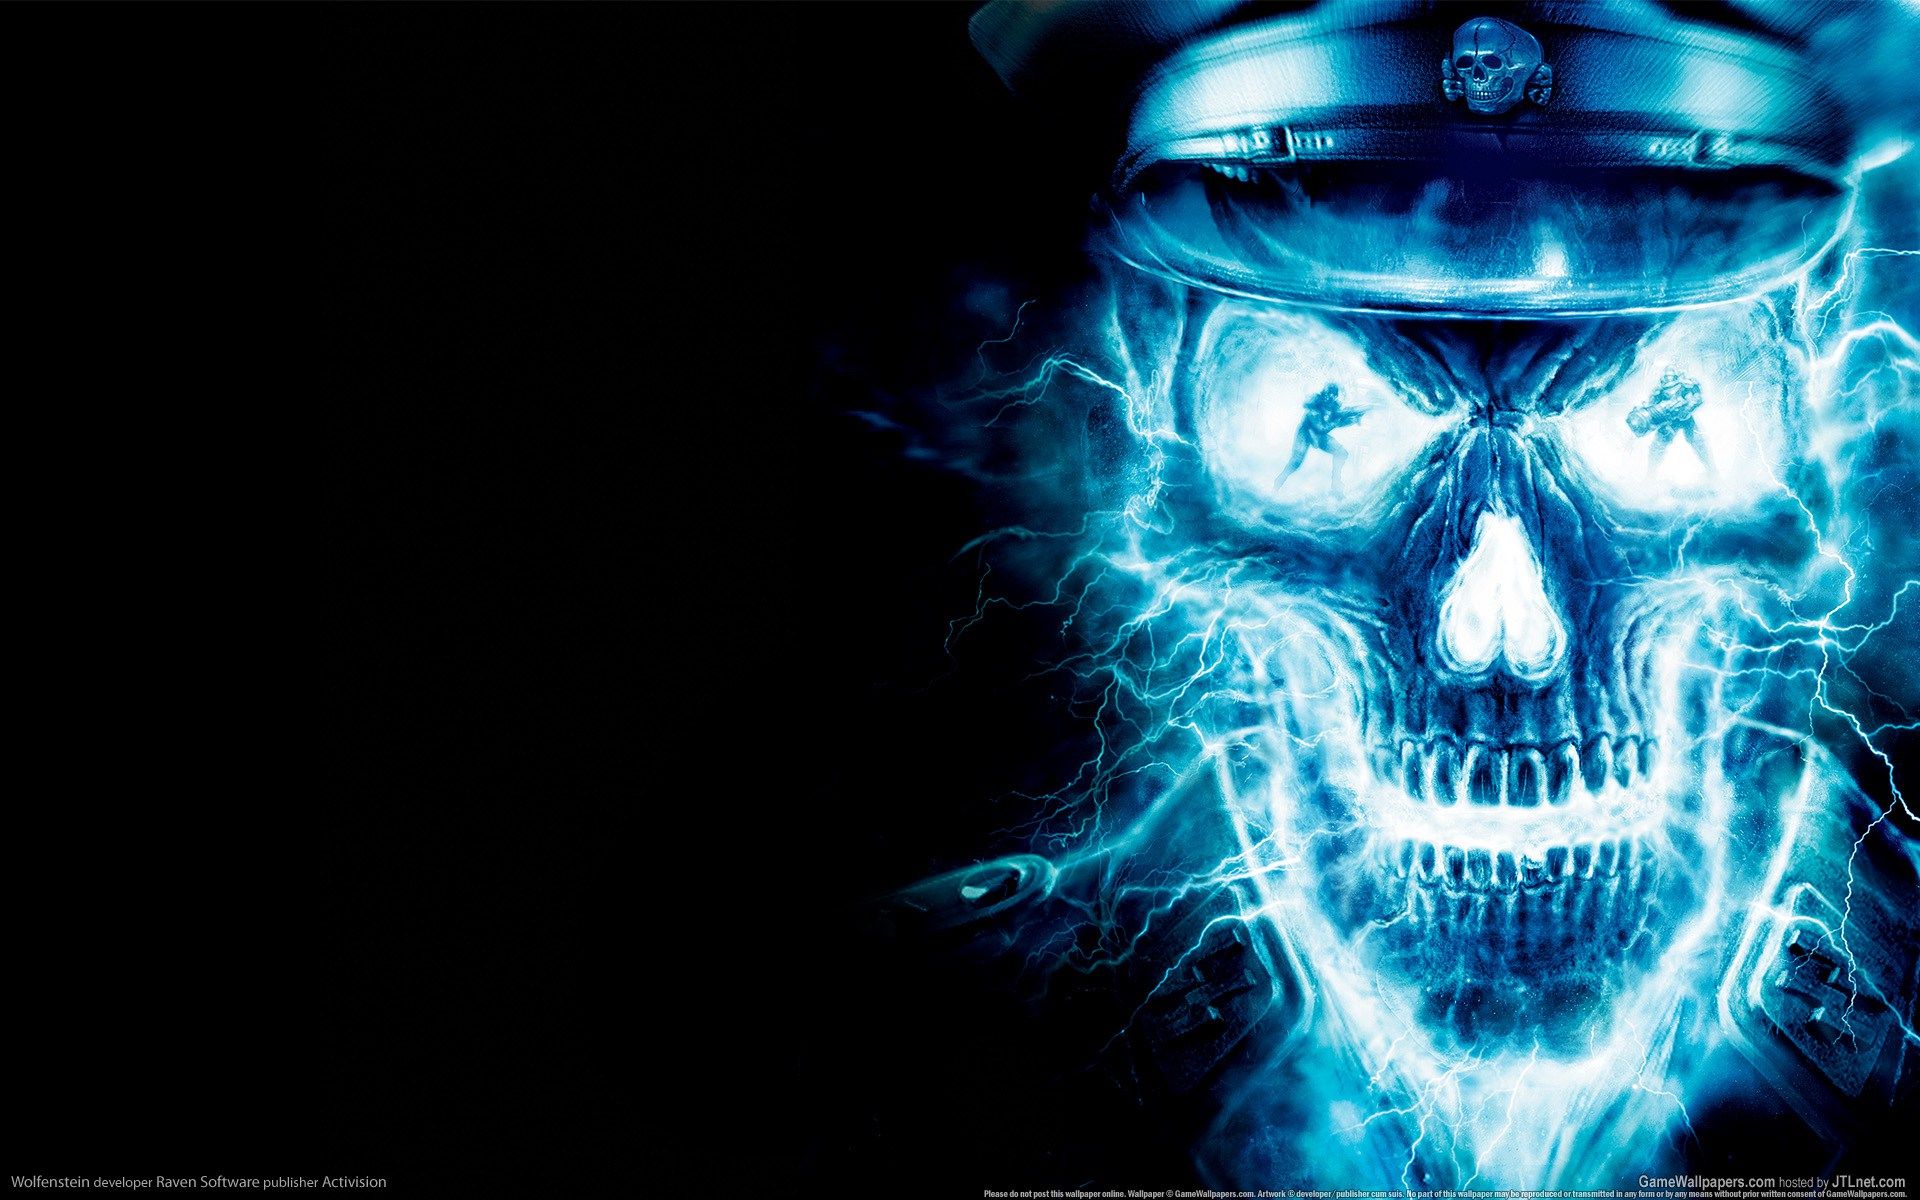 Return To Castle Wolfenstein Electric Skull Is An HD Wallpaper Posted In Gaming Wallpaper Category.. Ghost Rider Wallpaper, Skull Wallpaper, HD Skull Wallpaper